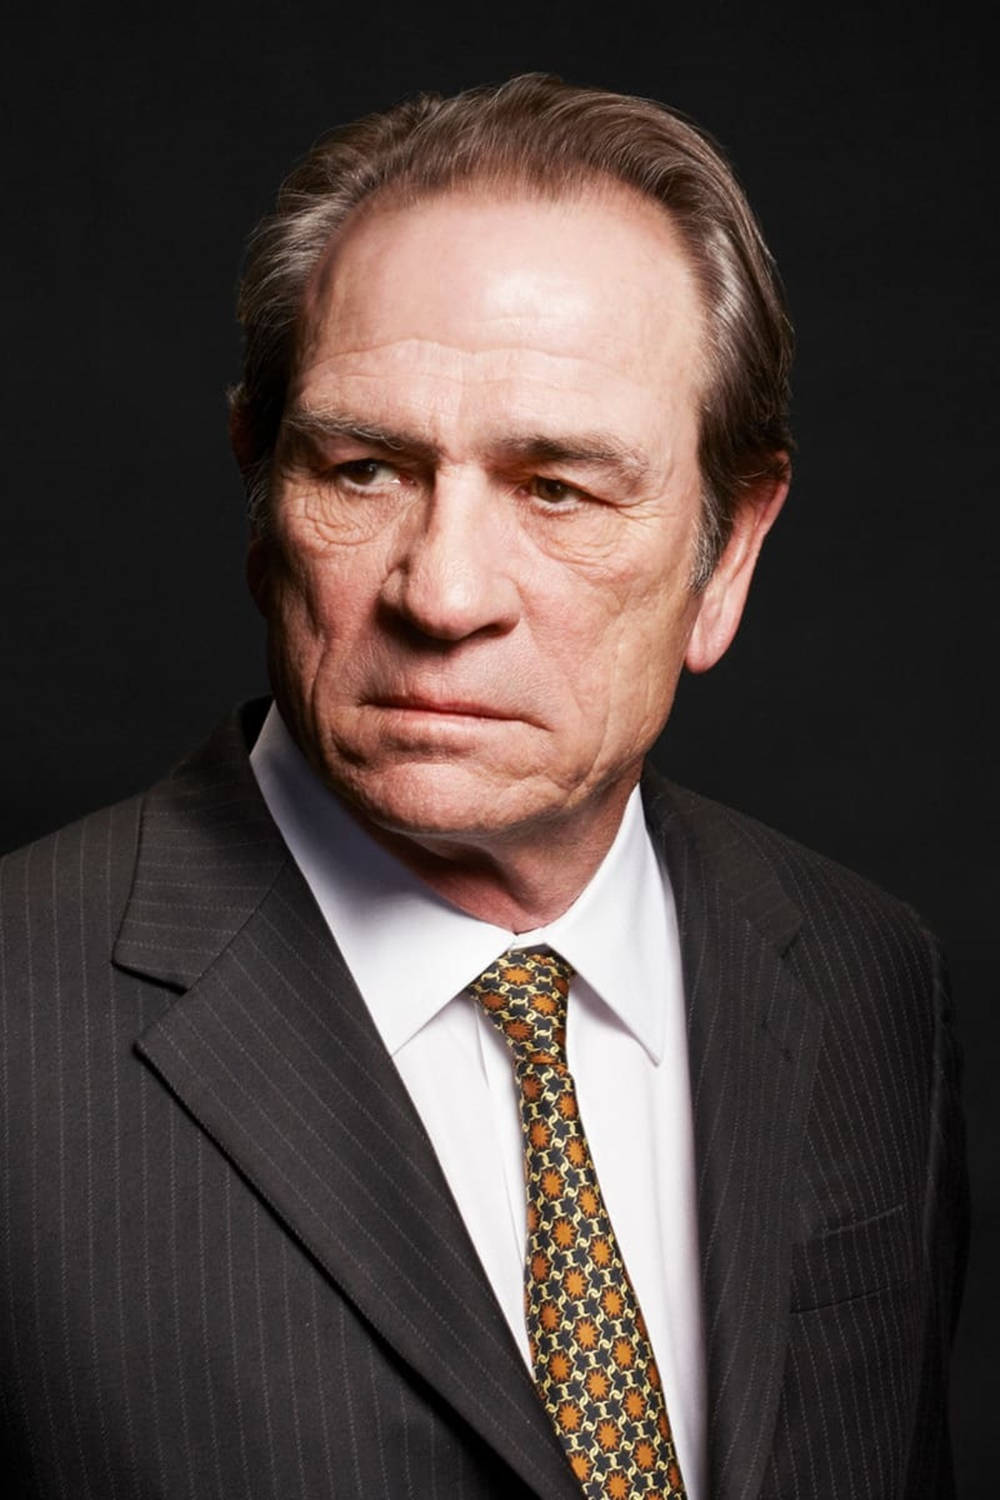 Caption: Portrayal of Tommy Lee Jones in a Thoughtful Indoor Headshot Wallpaper